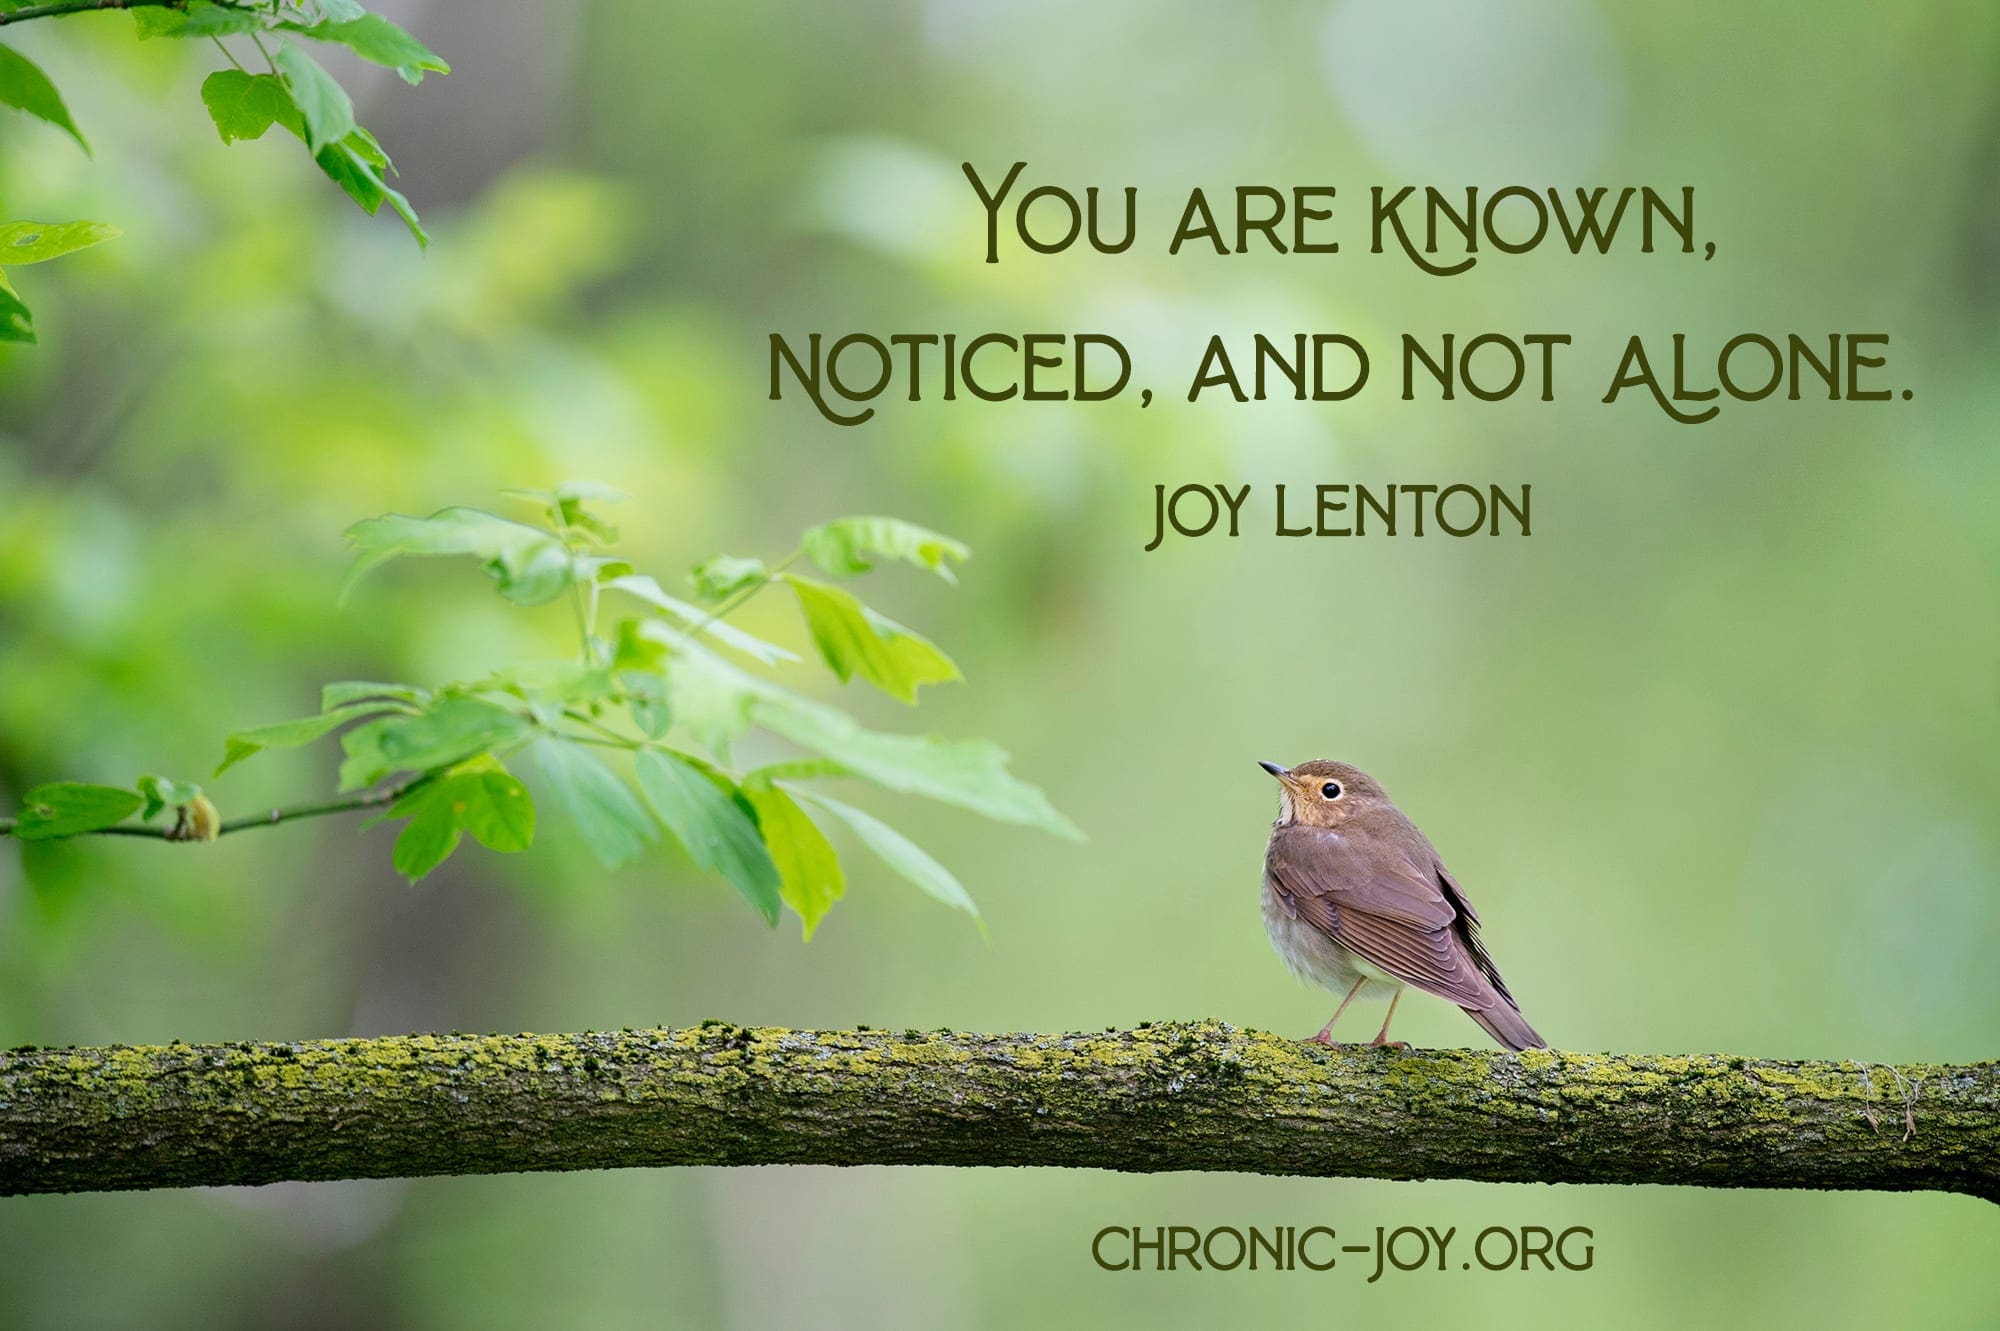 You are known, noticed, and not alone. Joy Lenton